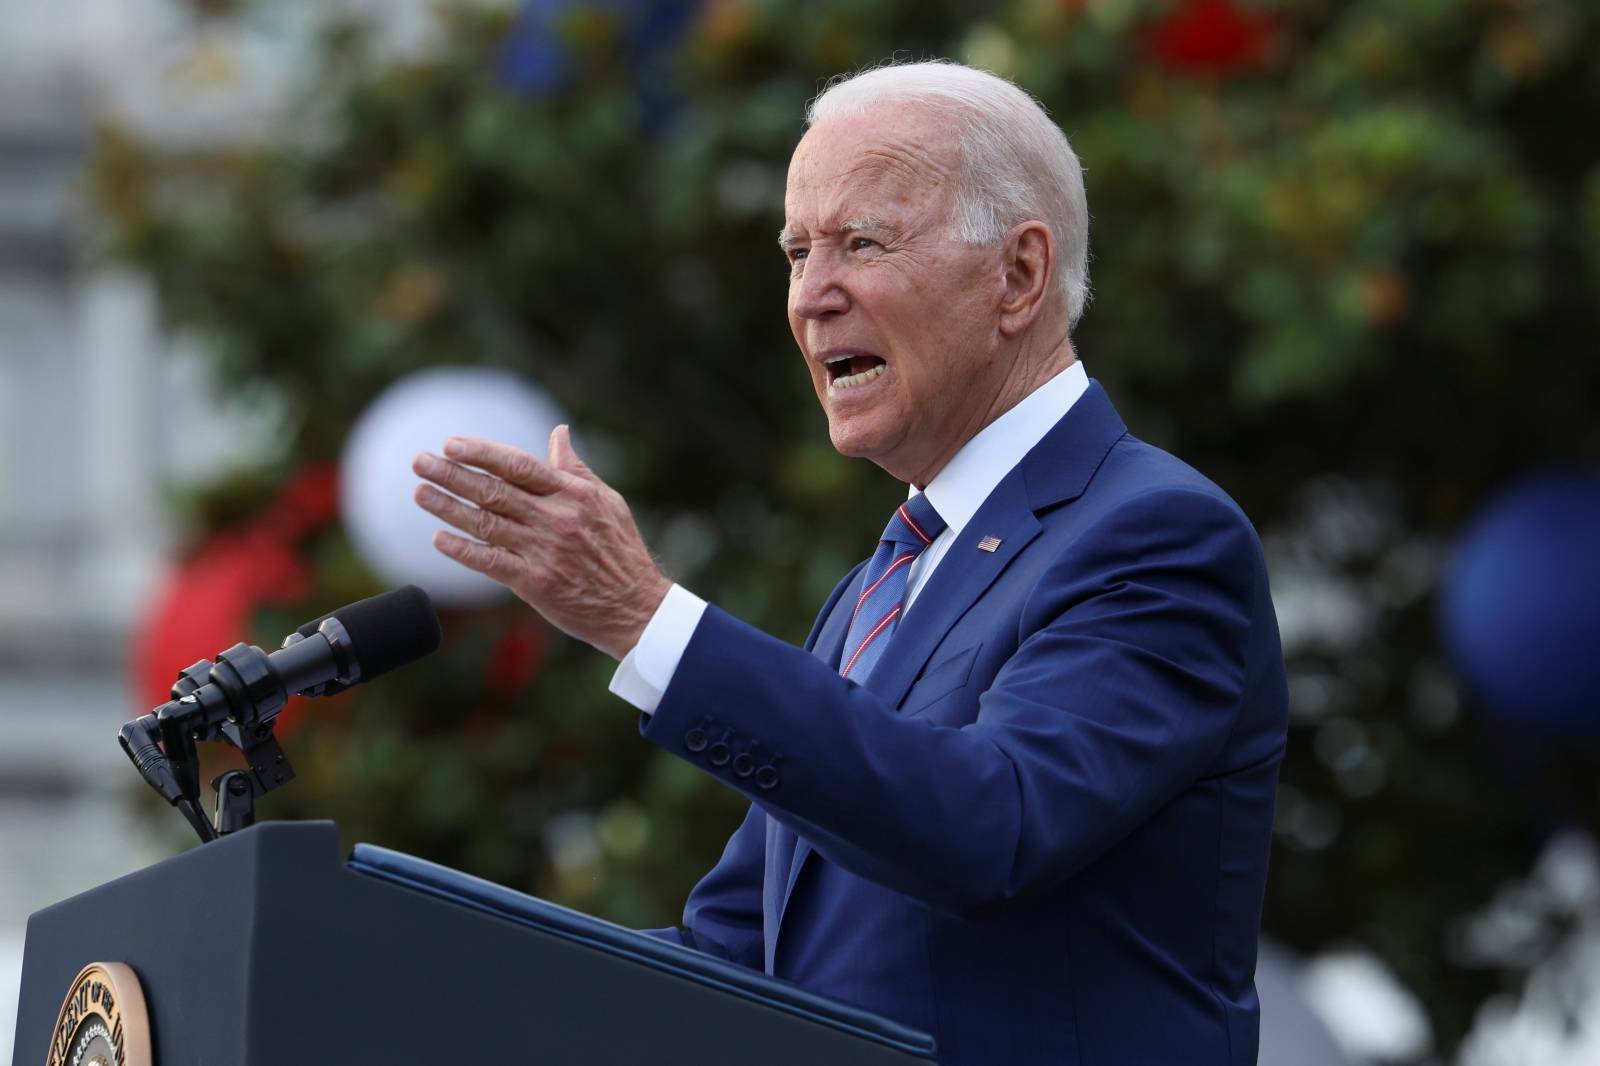 U.S. President Joe Biden delivers remarks at the White House at a celebration of Independence Day in Washington